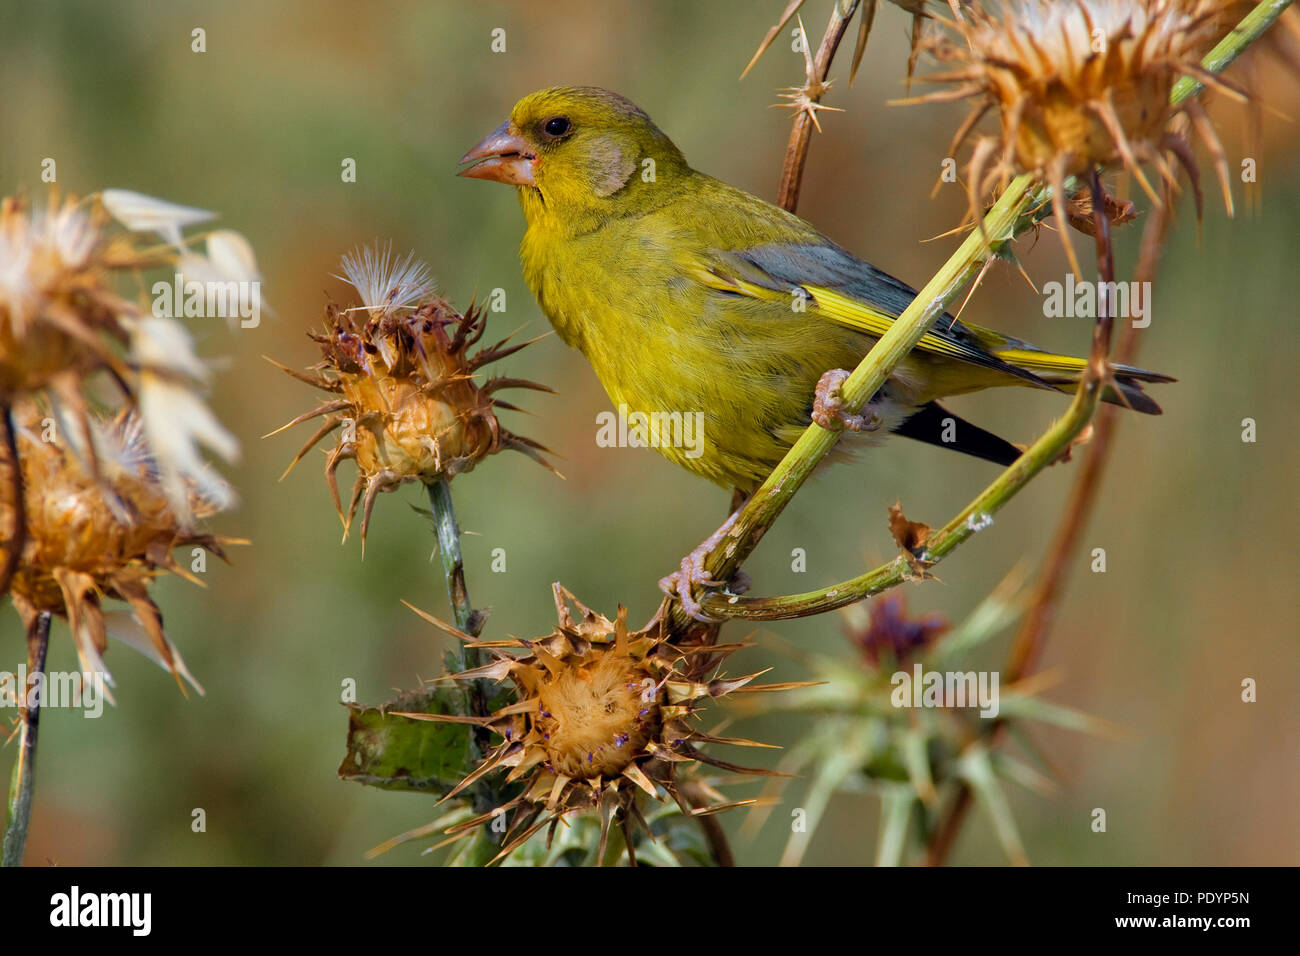 Groenling mannetje; Greenfinch; Carduelis chloris Stock Photo